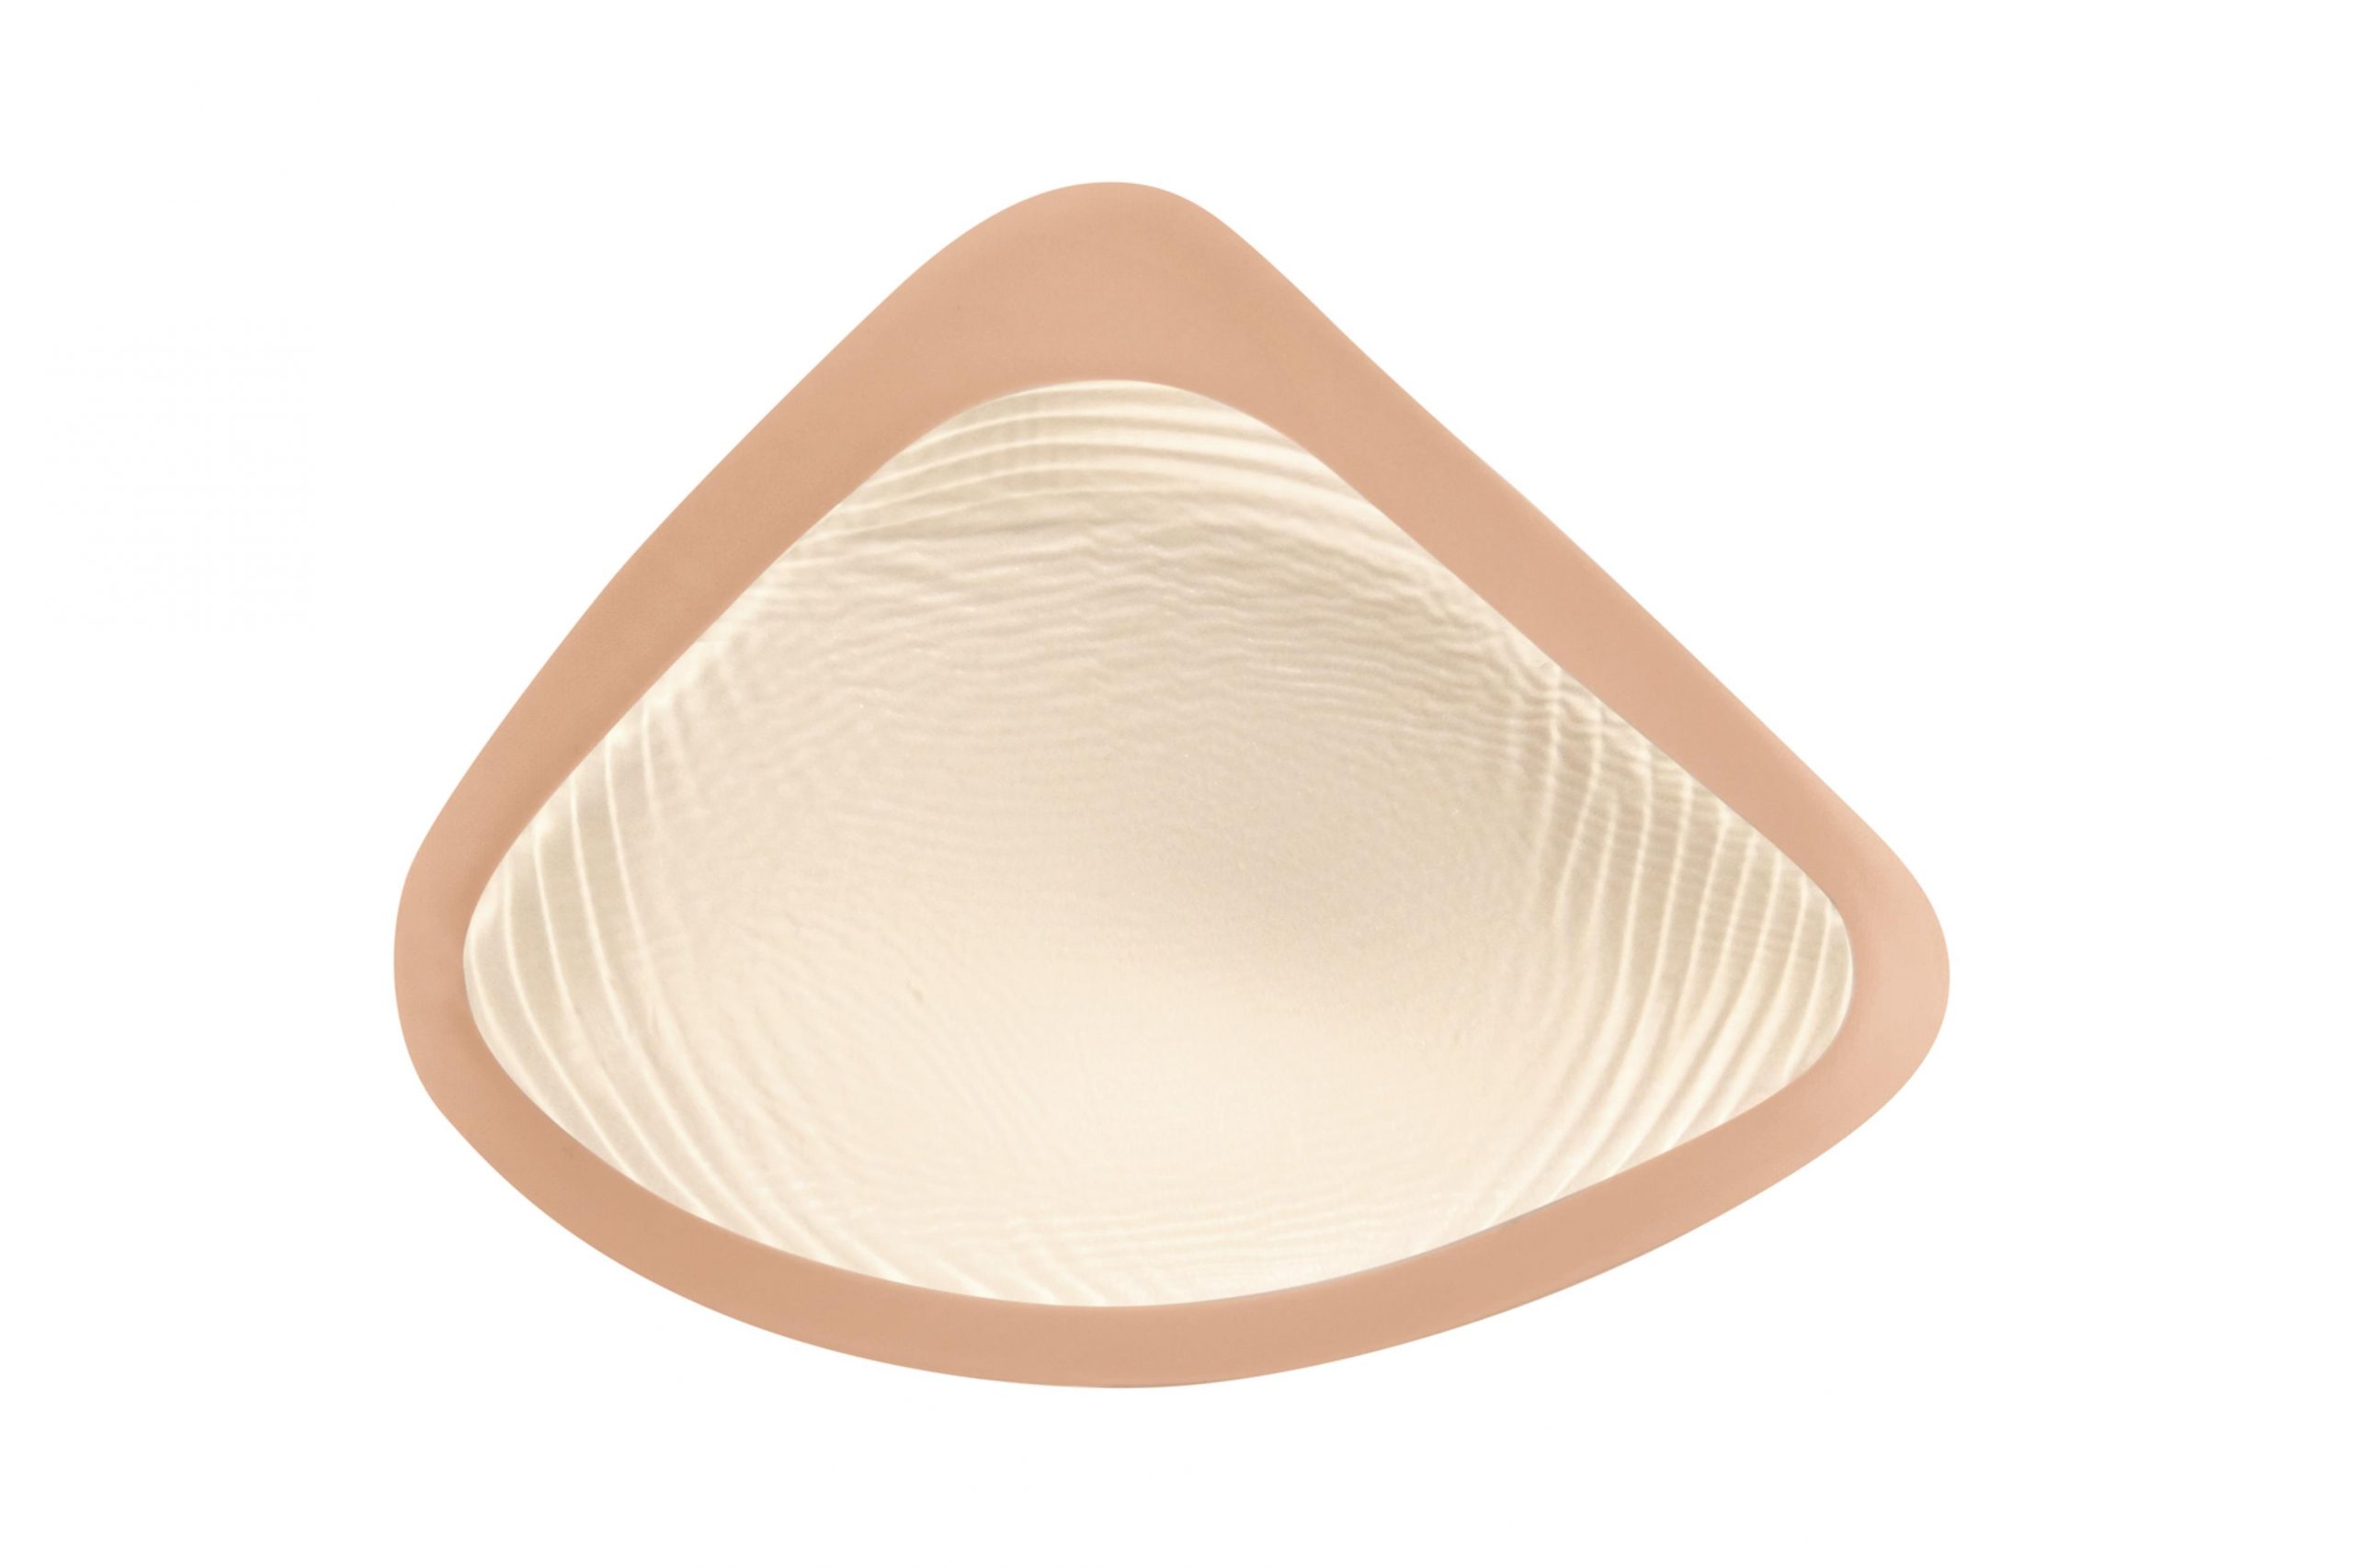 Essential 2A Silicone Breast Form, Amoena 353 Breast Form